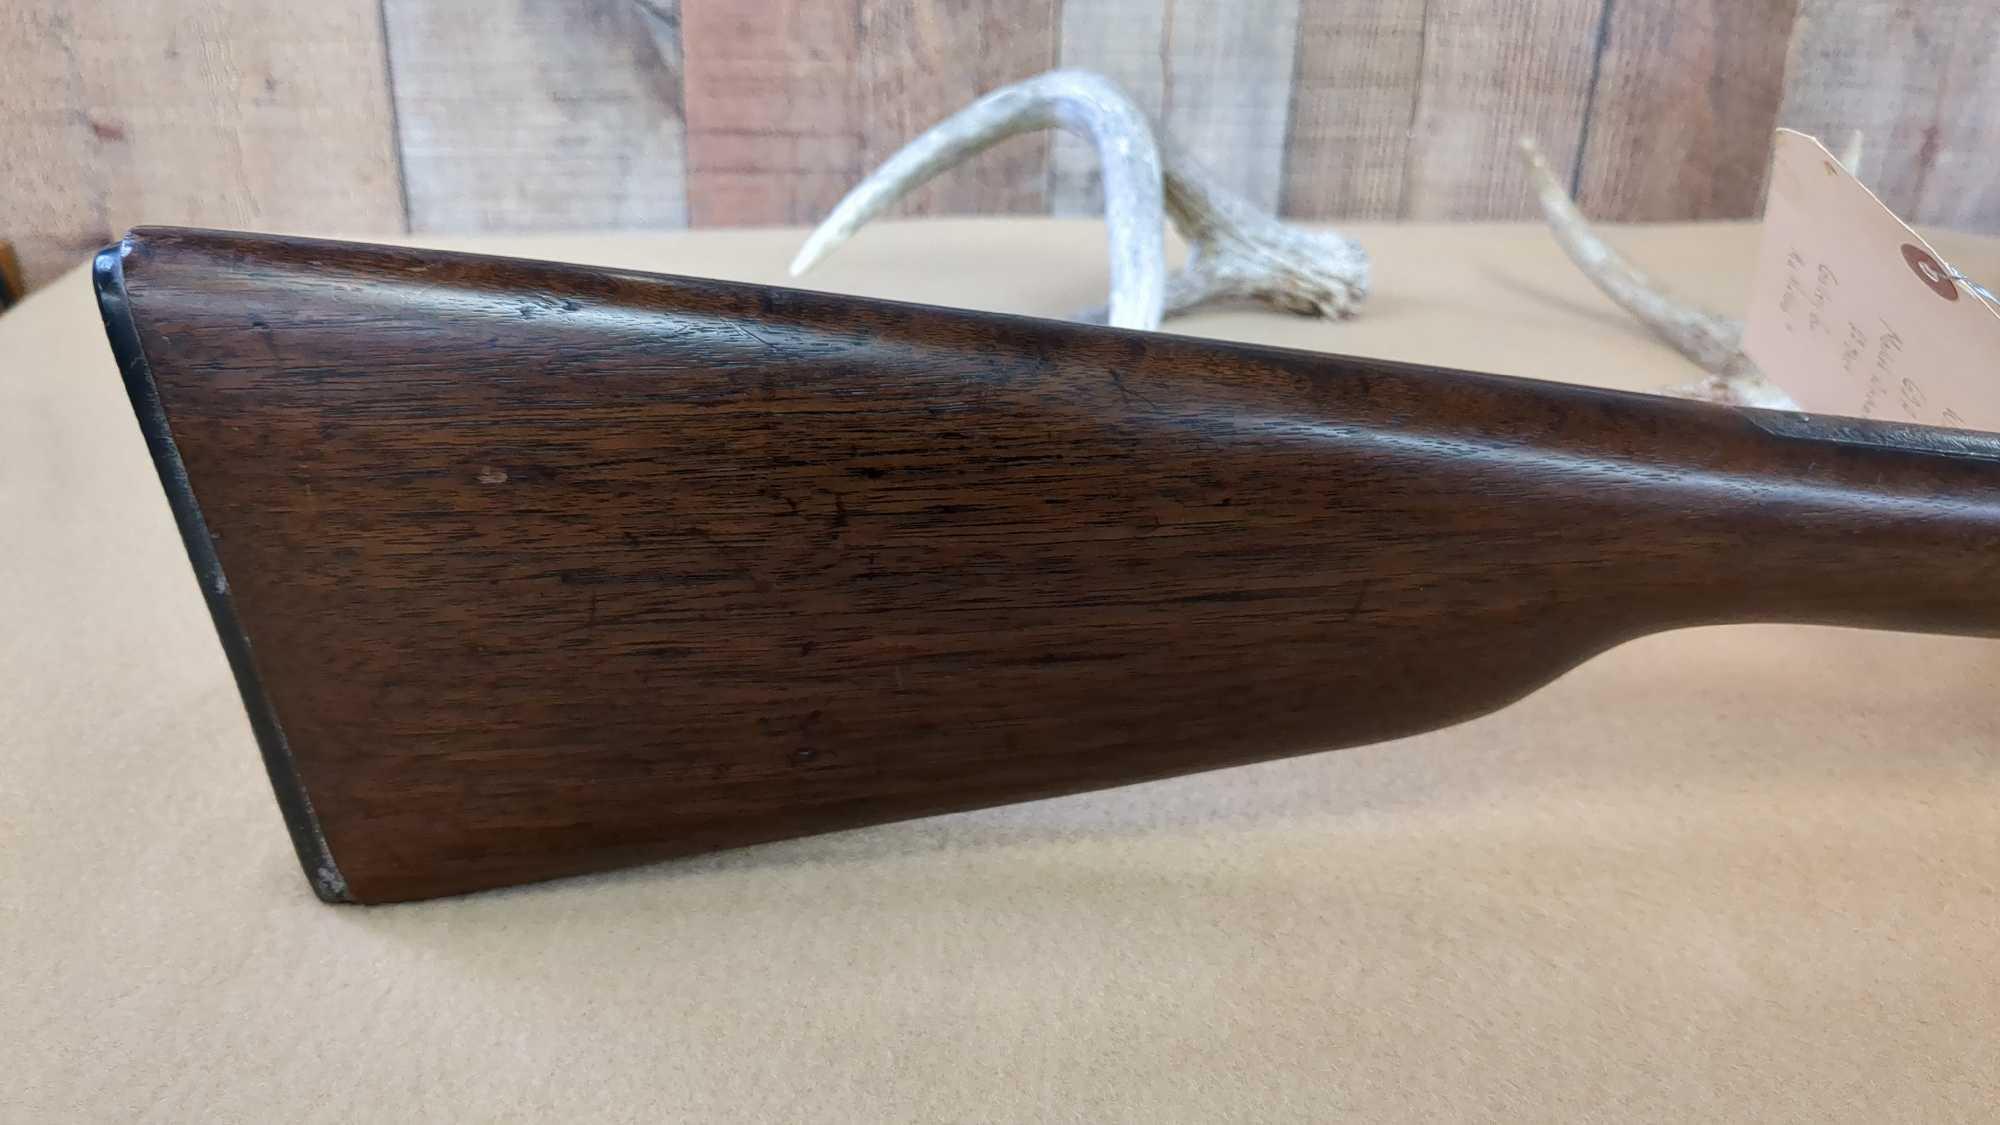 WINCHESTER MODEL 62A .22 SHORT GALLERY RIFLE